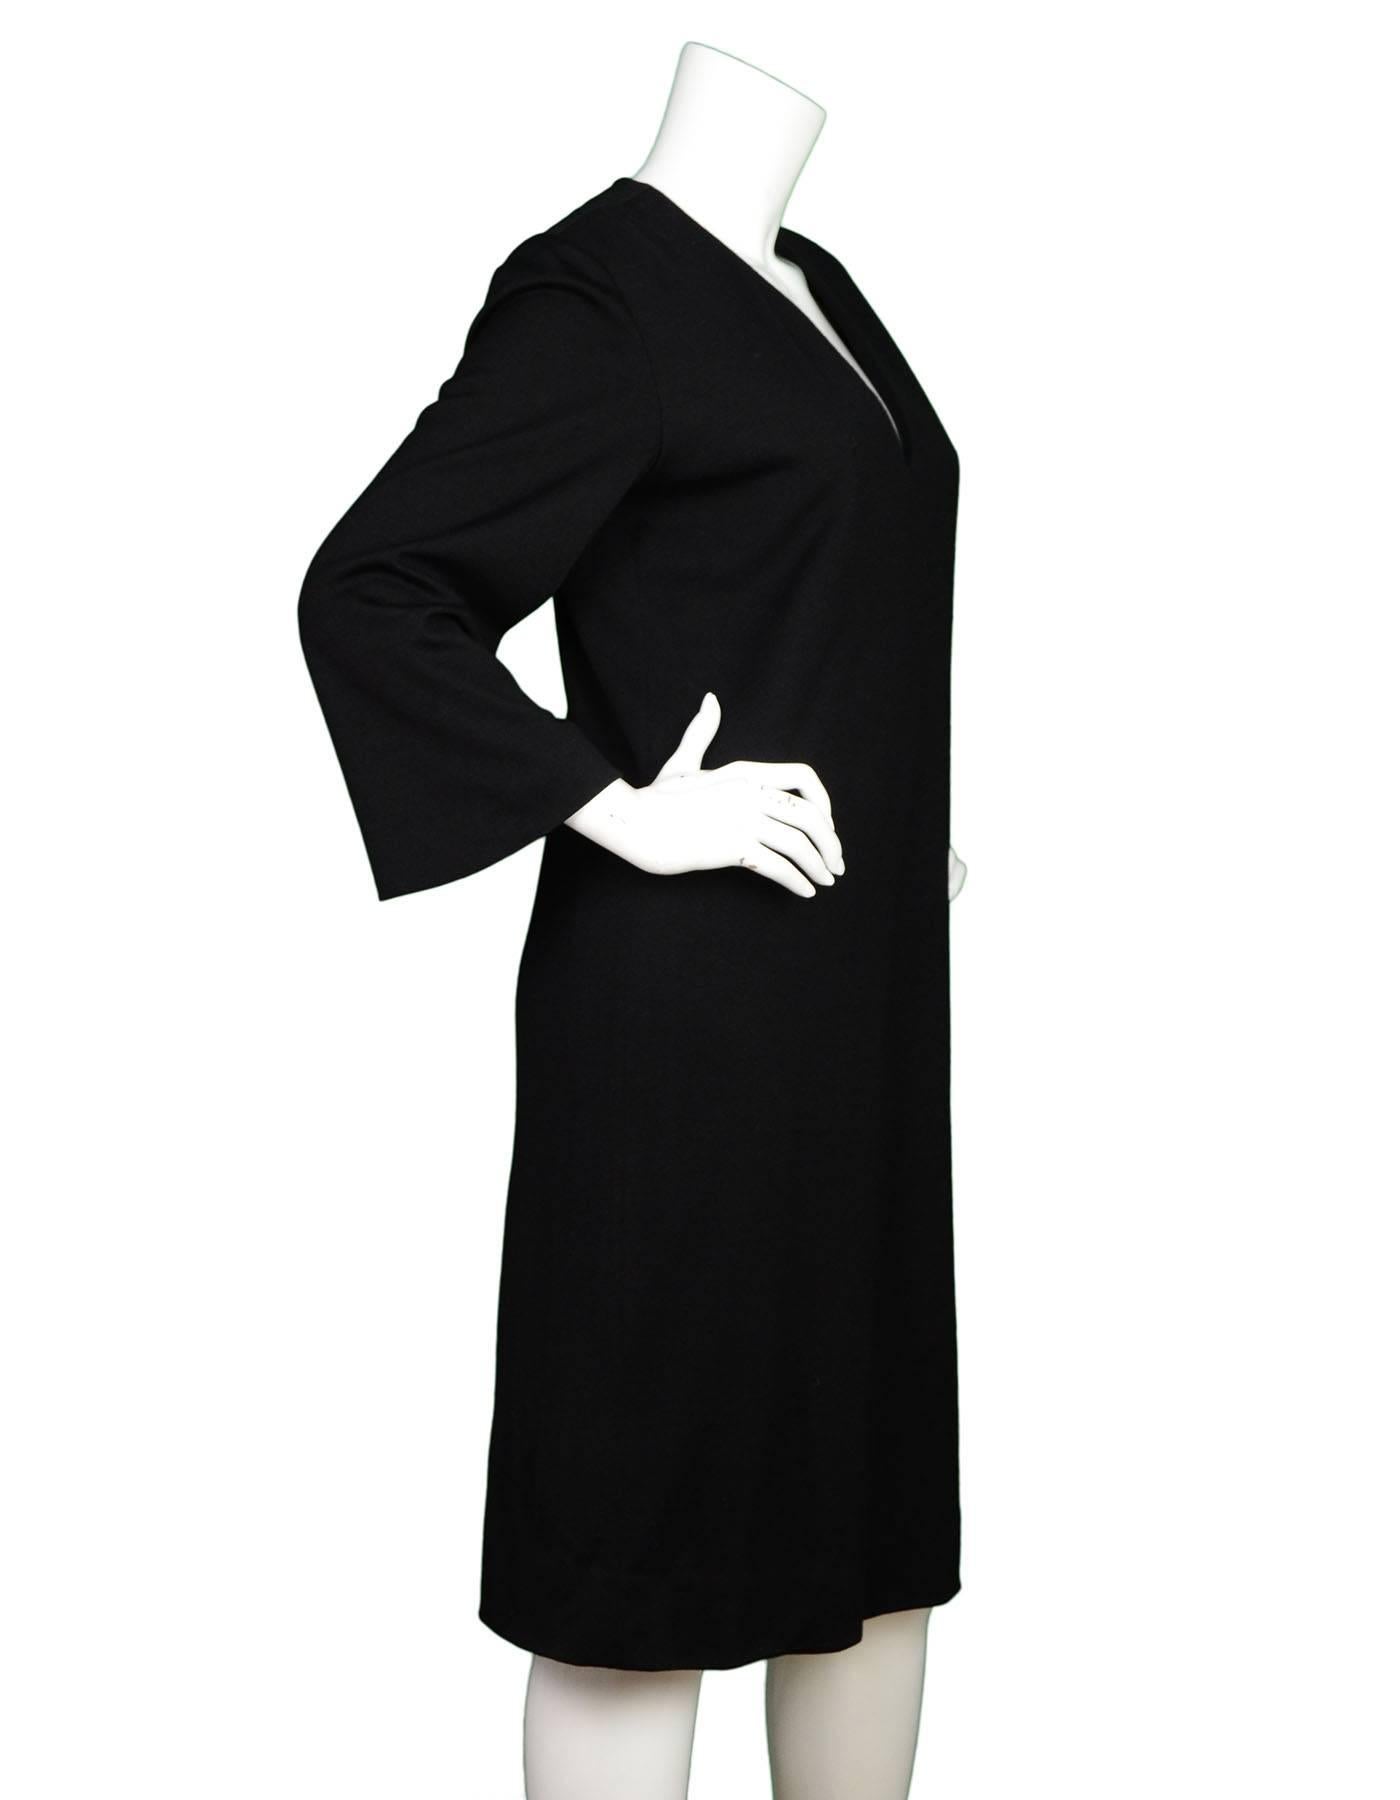 Yves Saint Laurent Black Wool Dress 
Made In: France
Color: Black
Composition: 86% wool, 14% silk
Lining: Black, silk blend
Closure/Opening: Zip up back
Exterior Pockets: None
Interior Pockets: None
Overall Condition: Excellent vintage, pre-owned